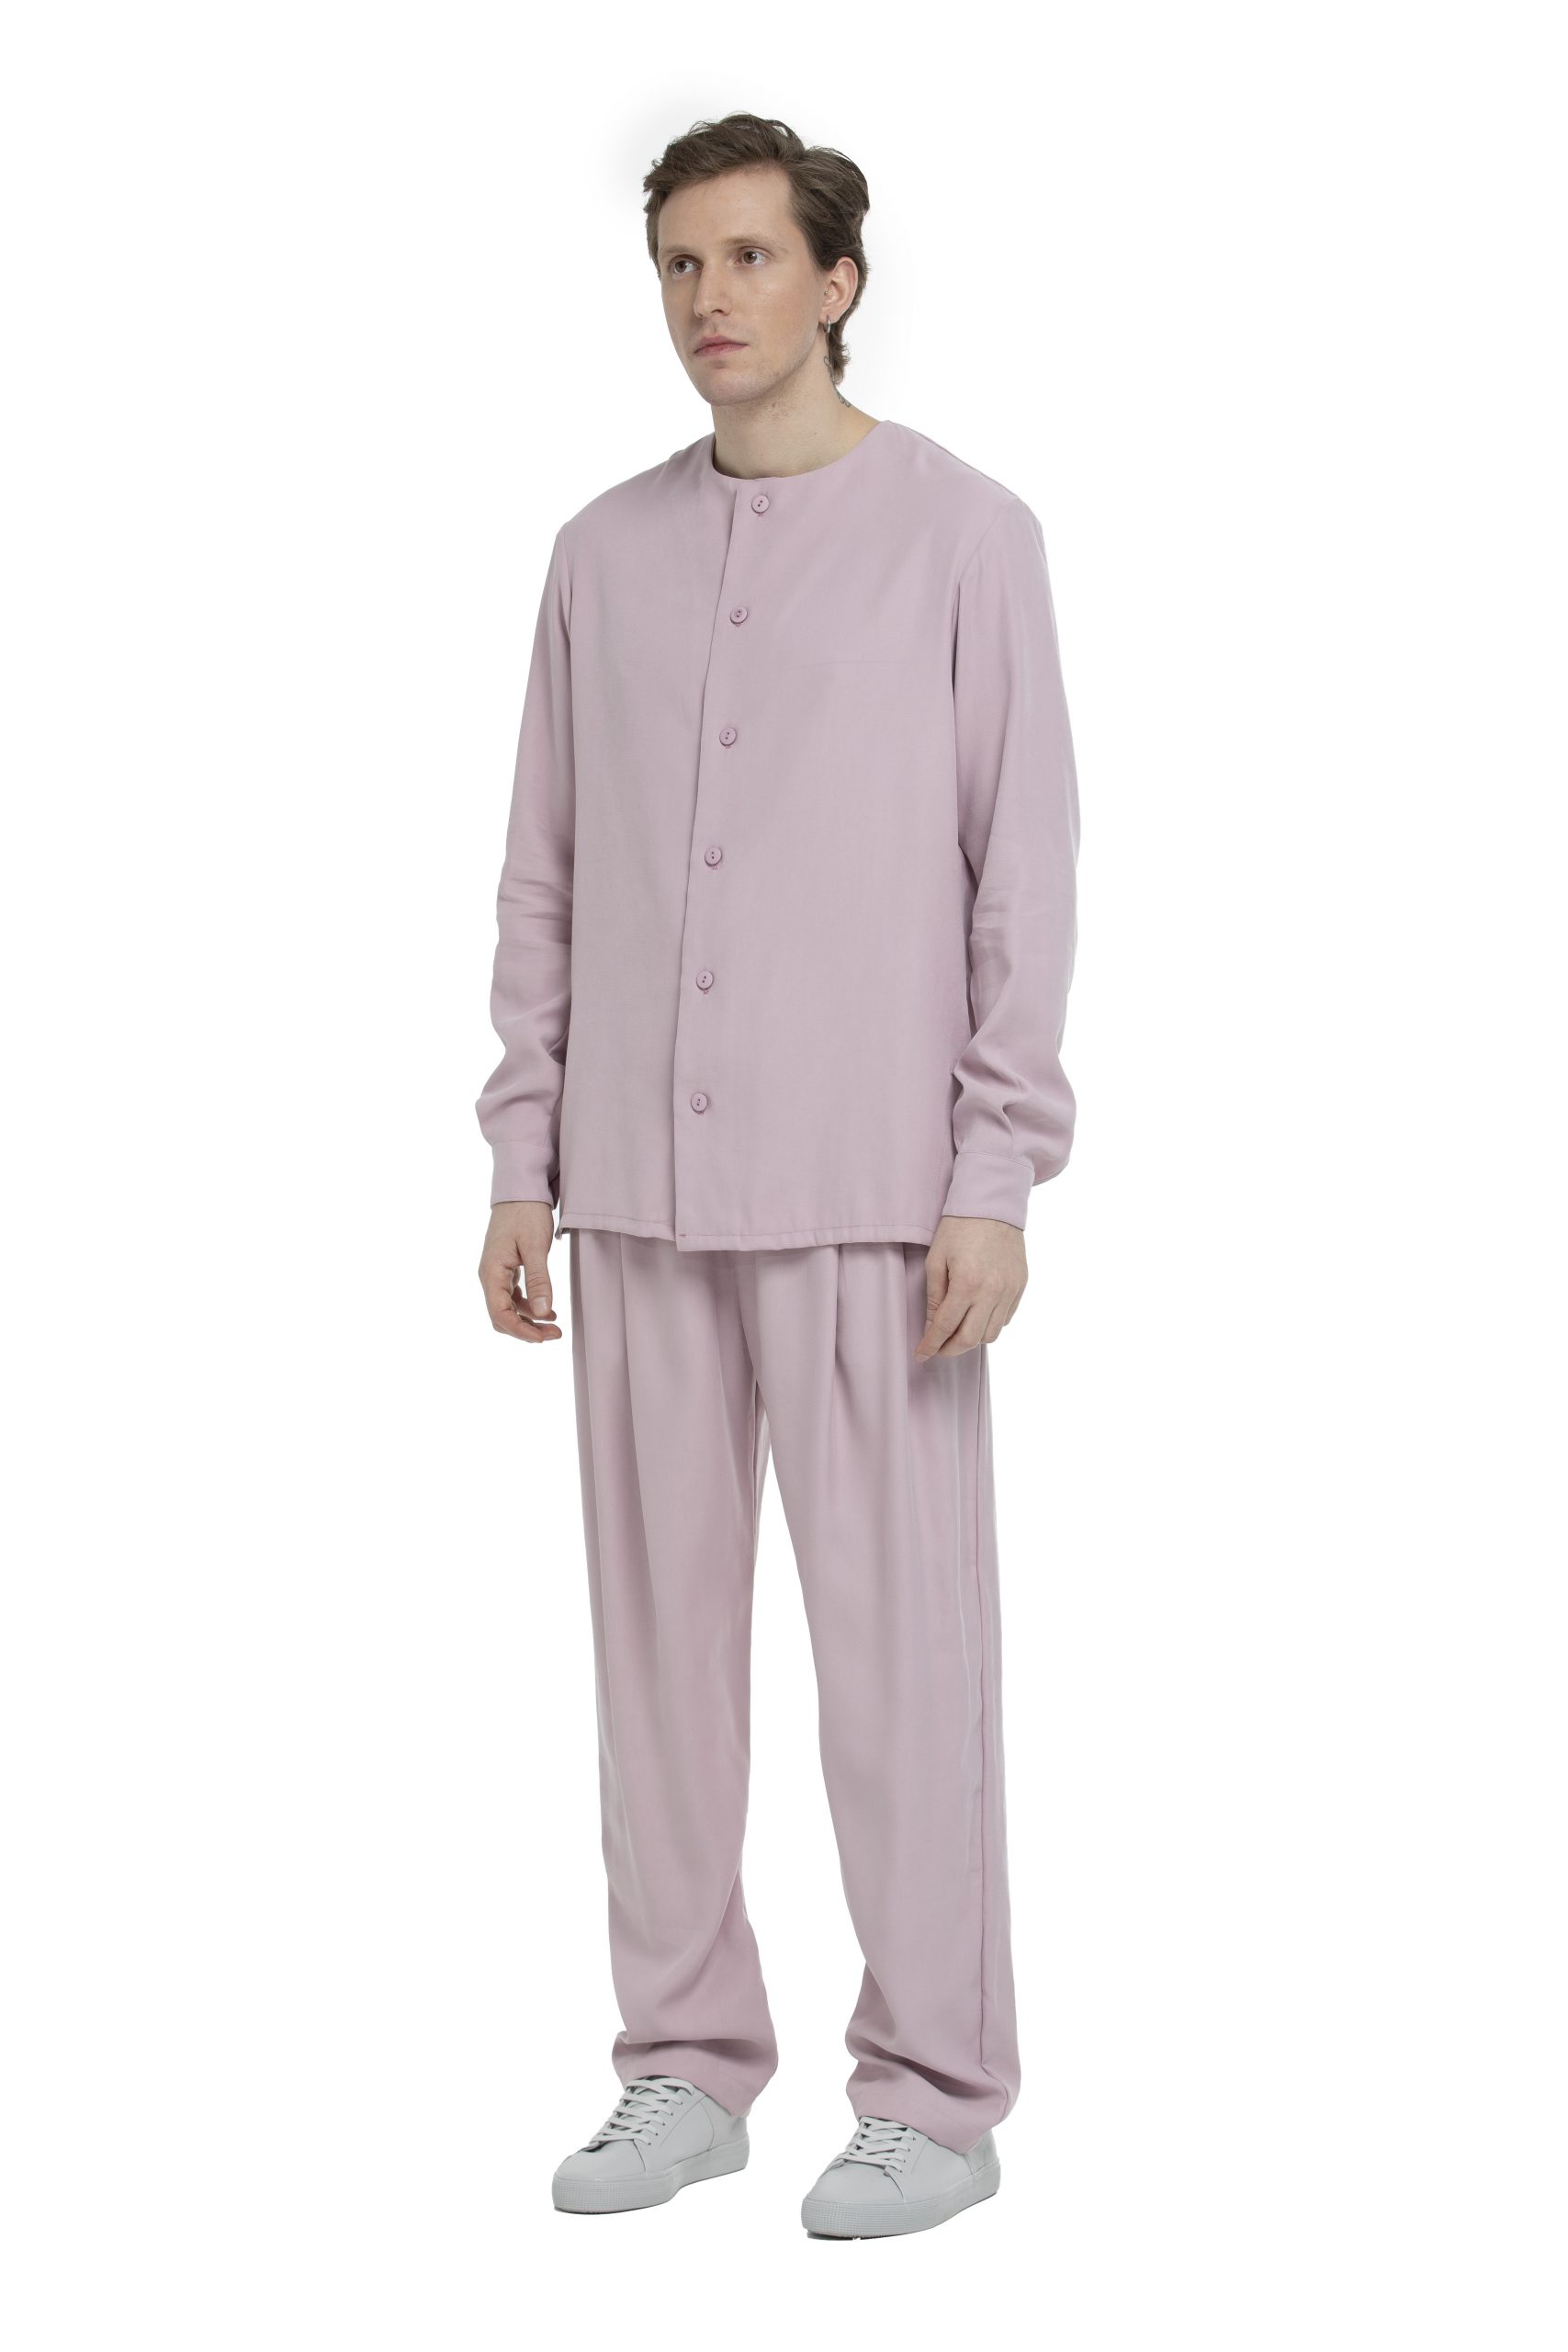 Viscose fabric shirt with no collar and back pleats , in light pink